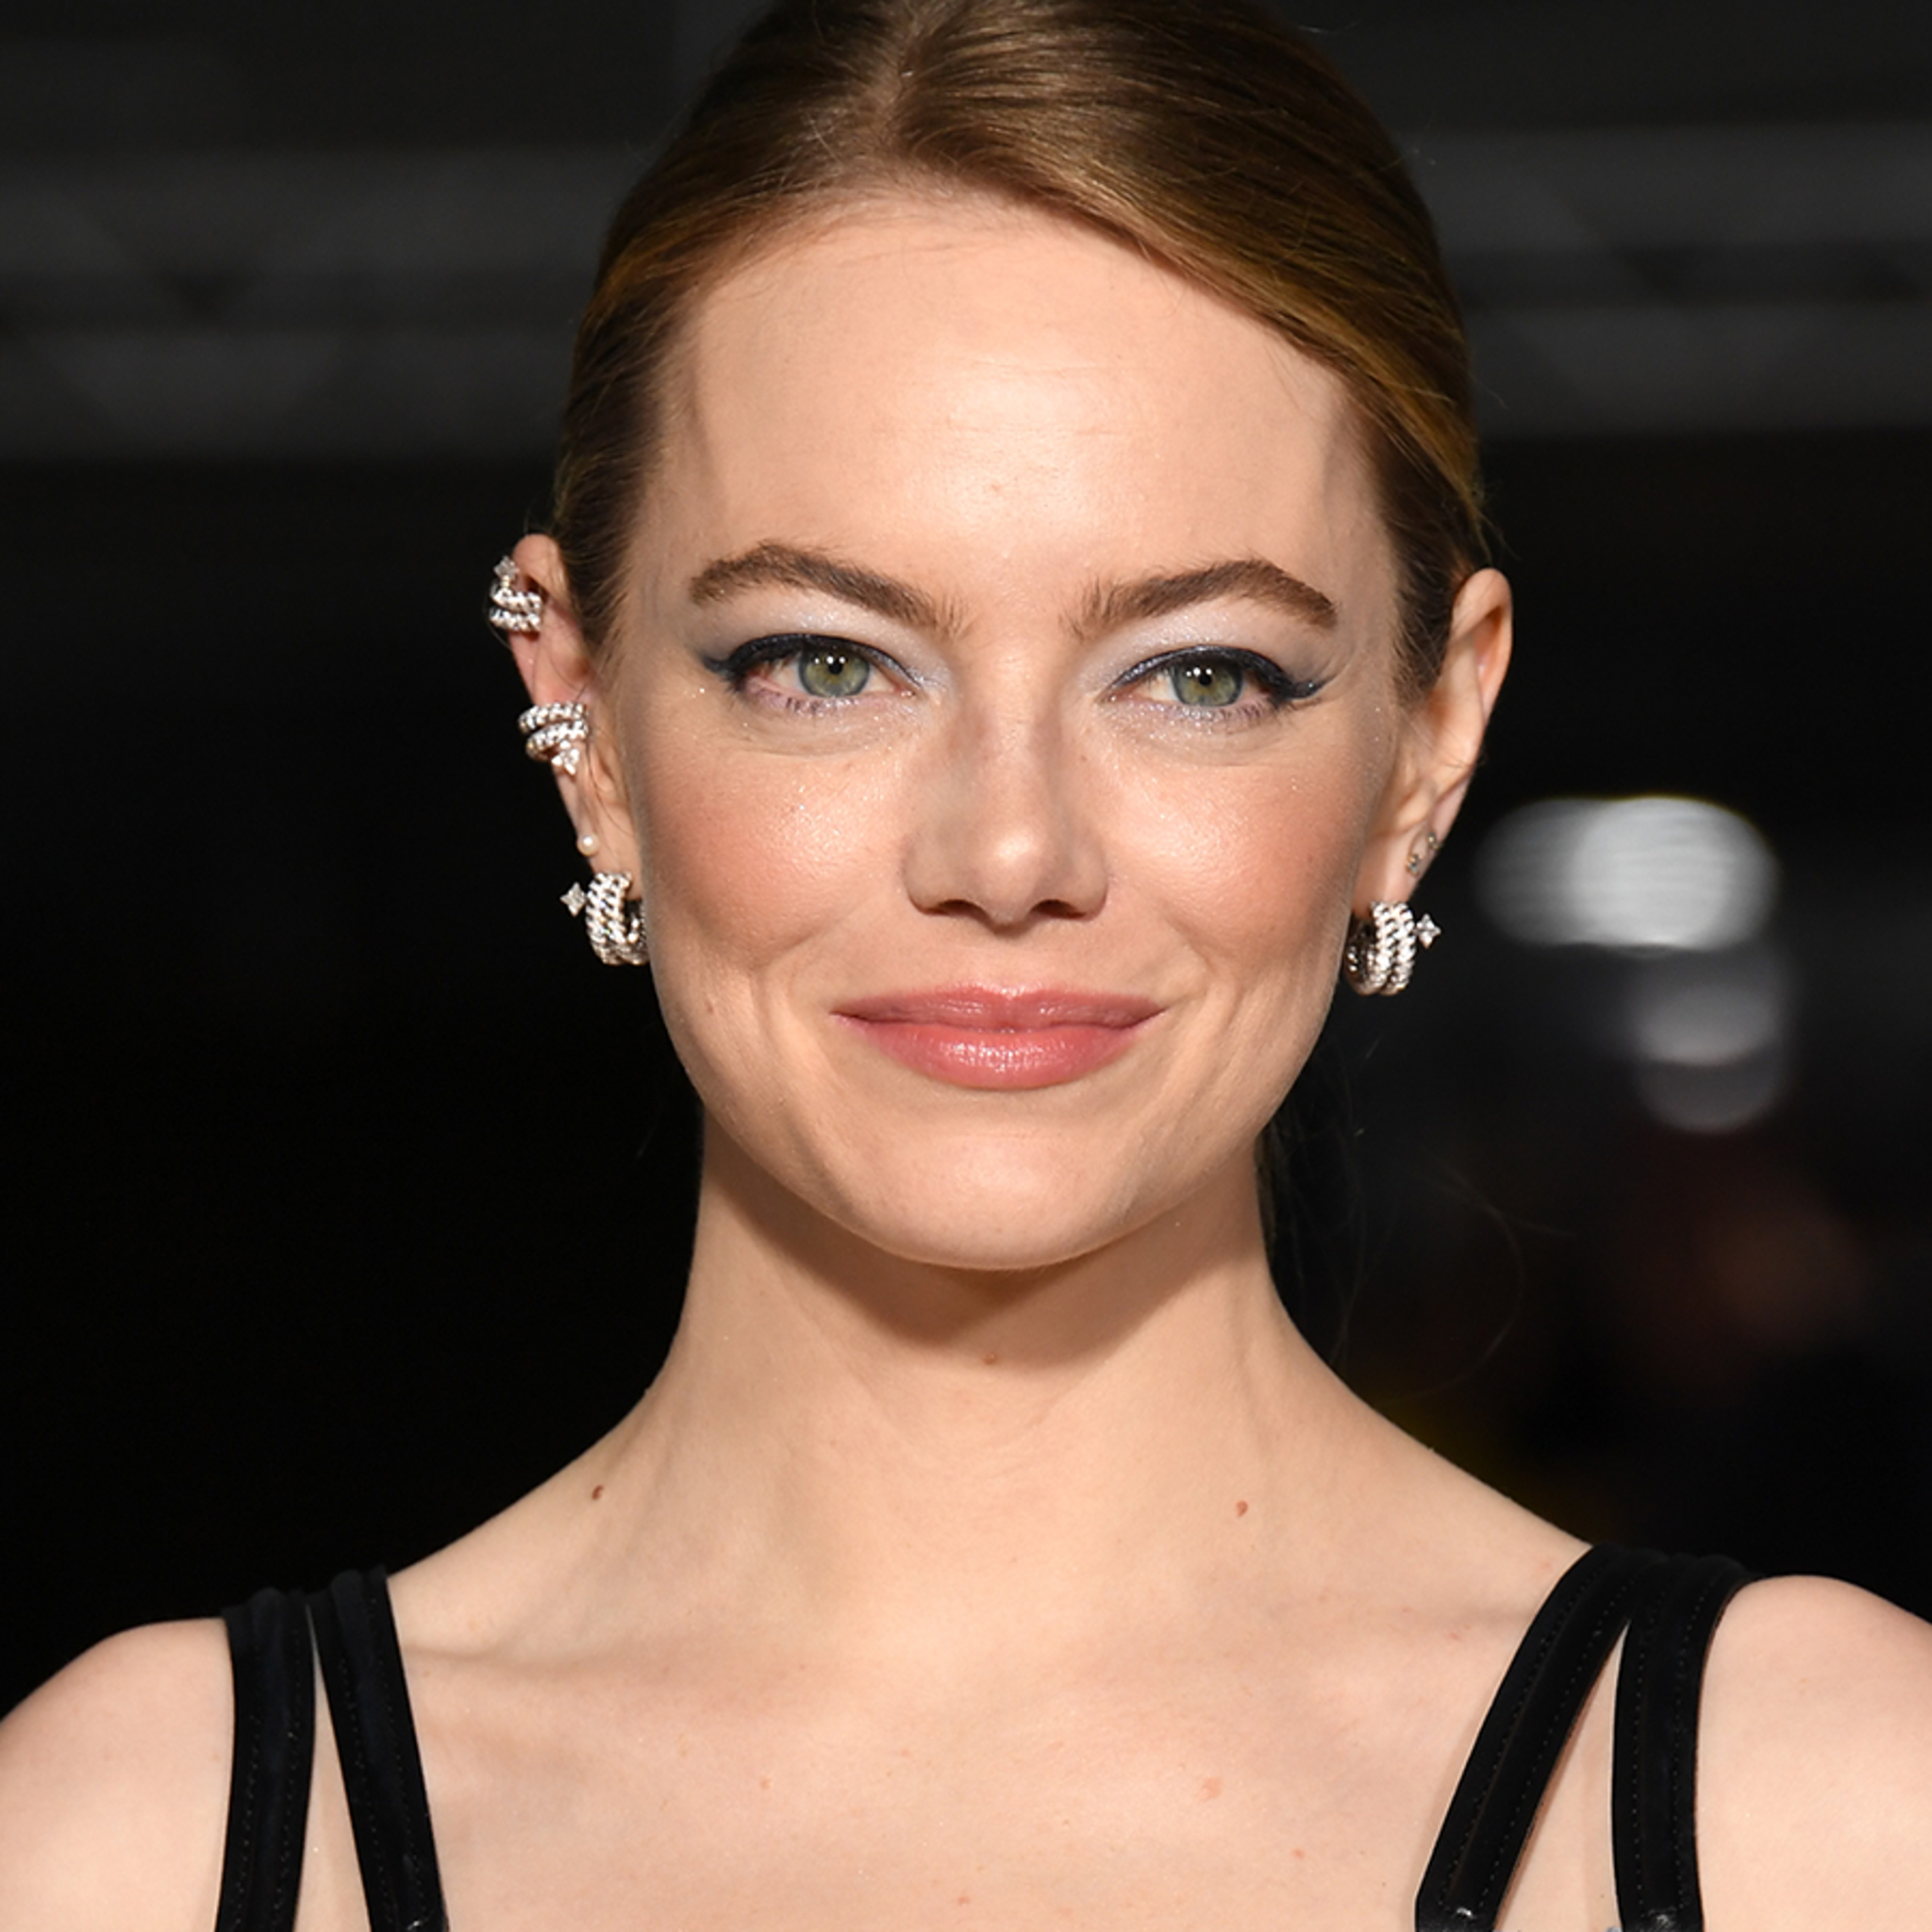 Emma Stone Embraces Graphic Sex in New Film, Plays Lady with Child Mind image picture